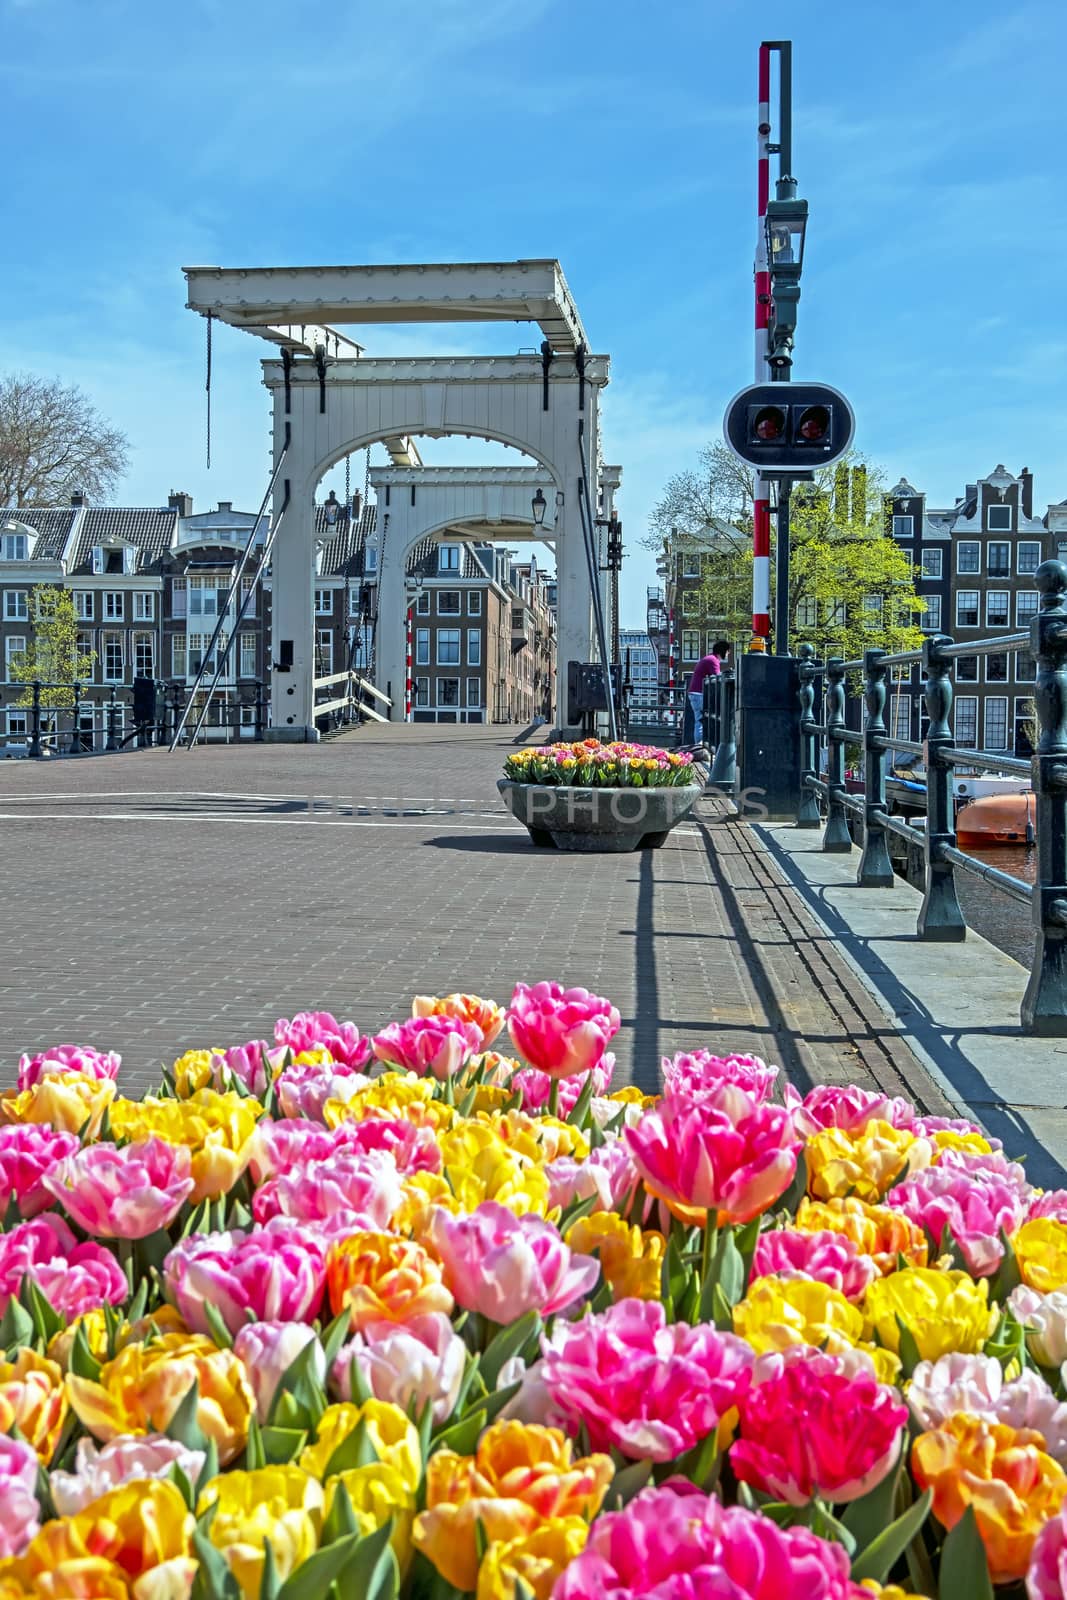 Tiny bridge in Amsterdam the Netherlands in springtime by devy